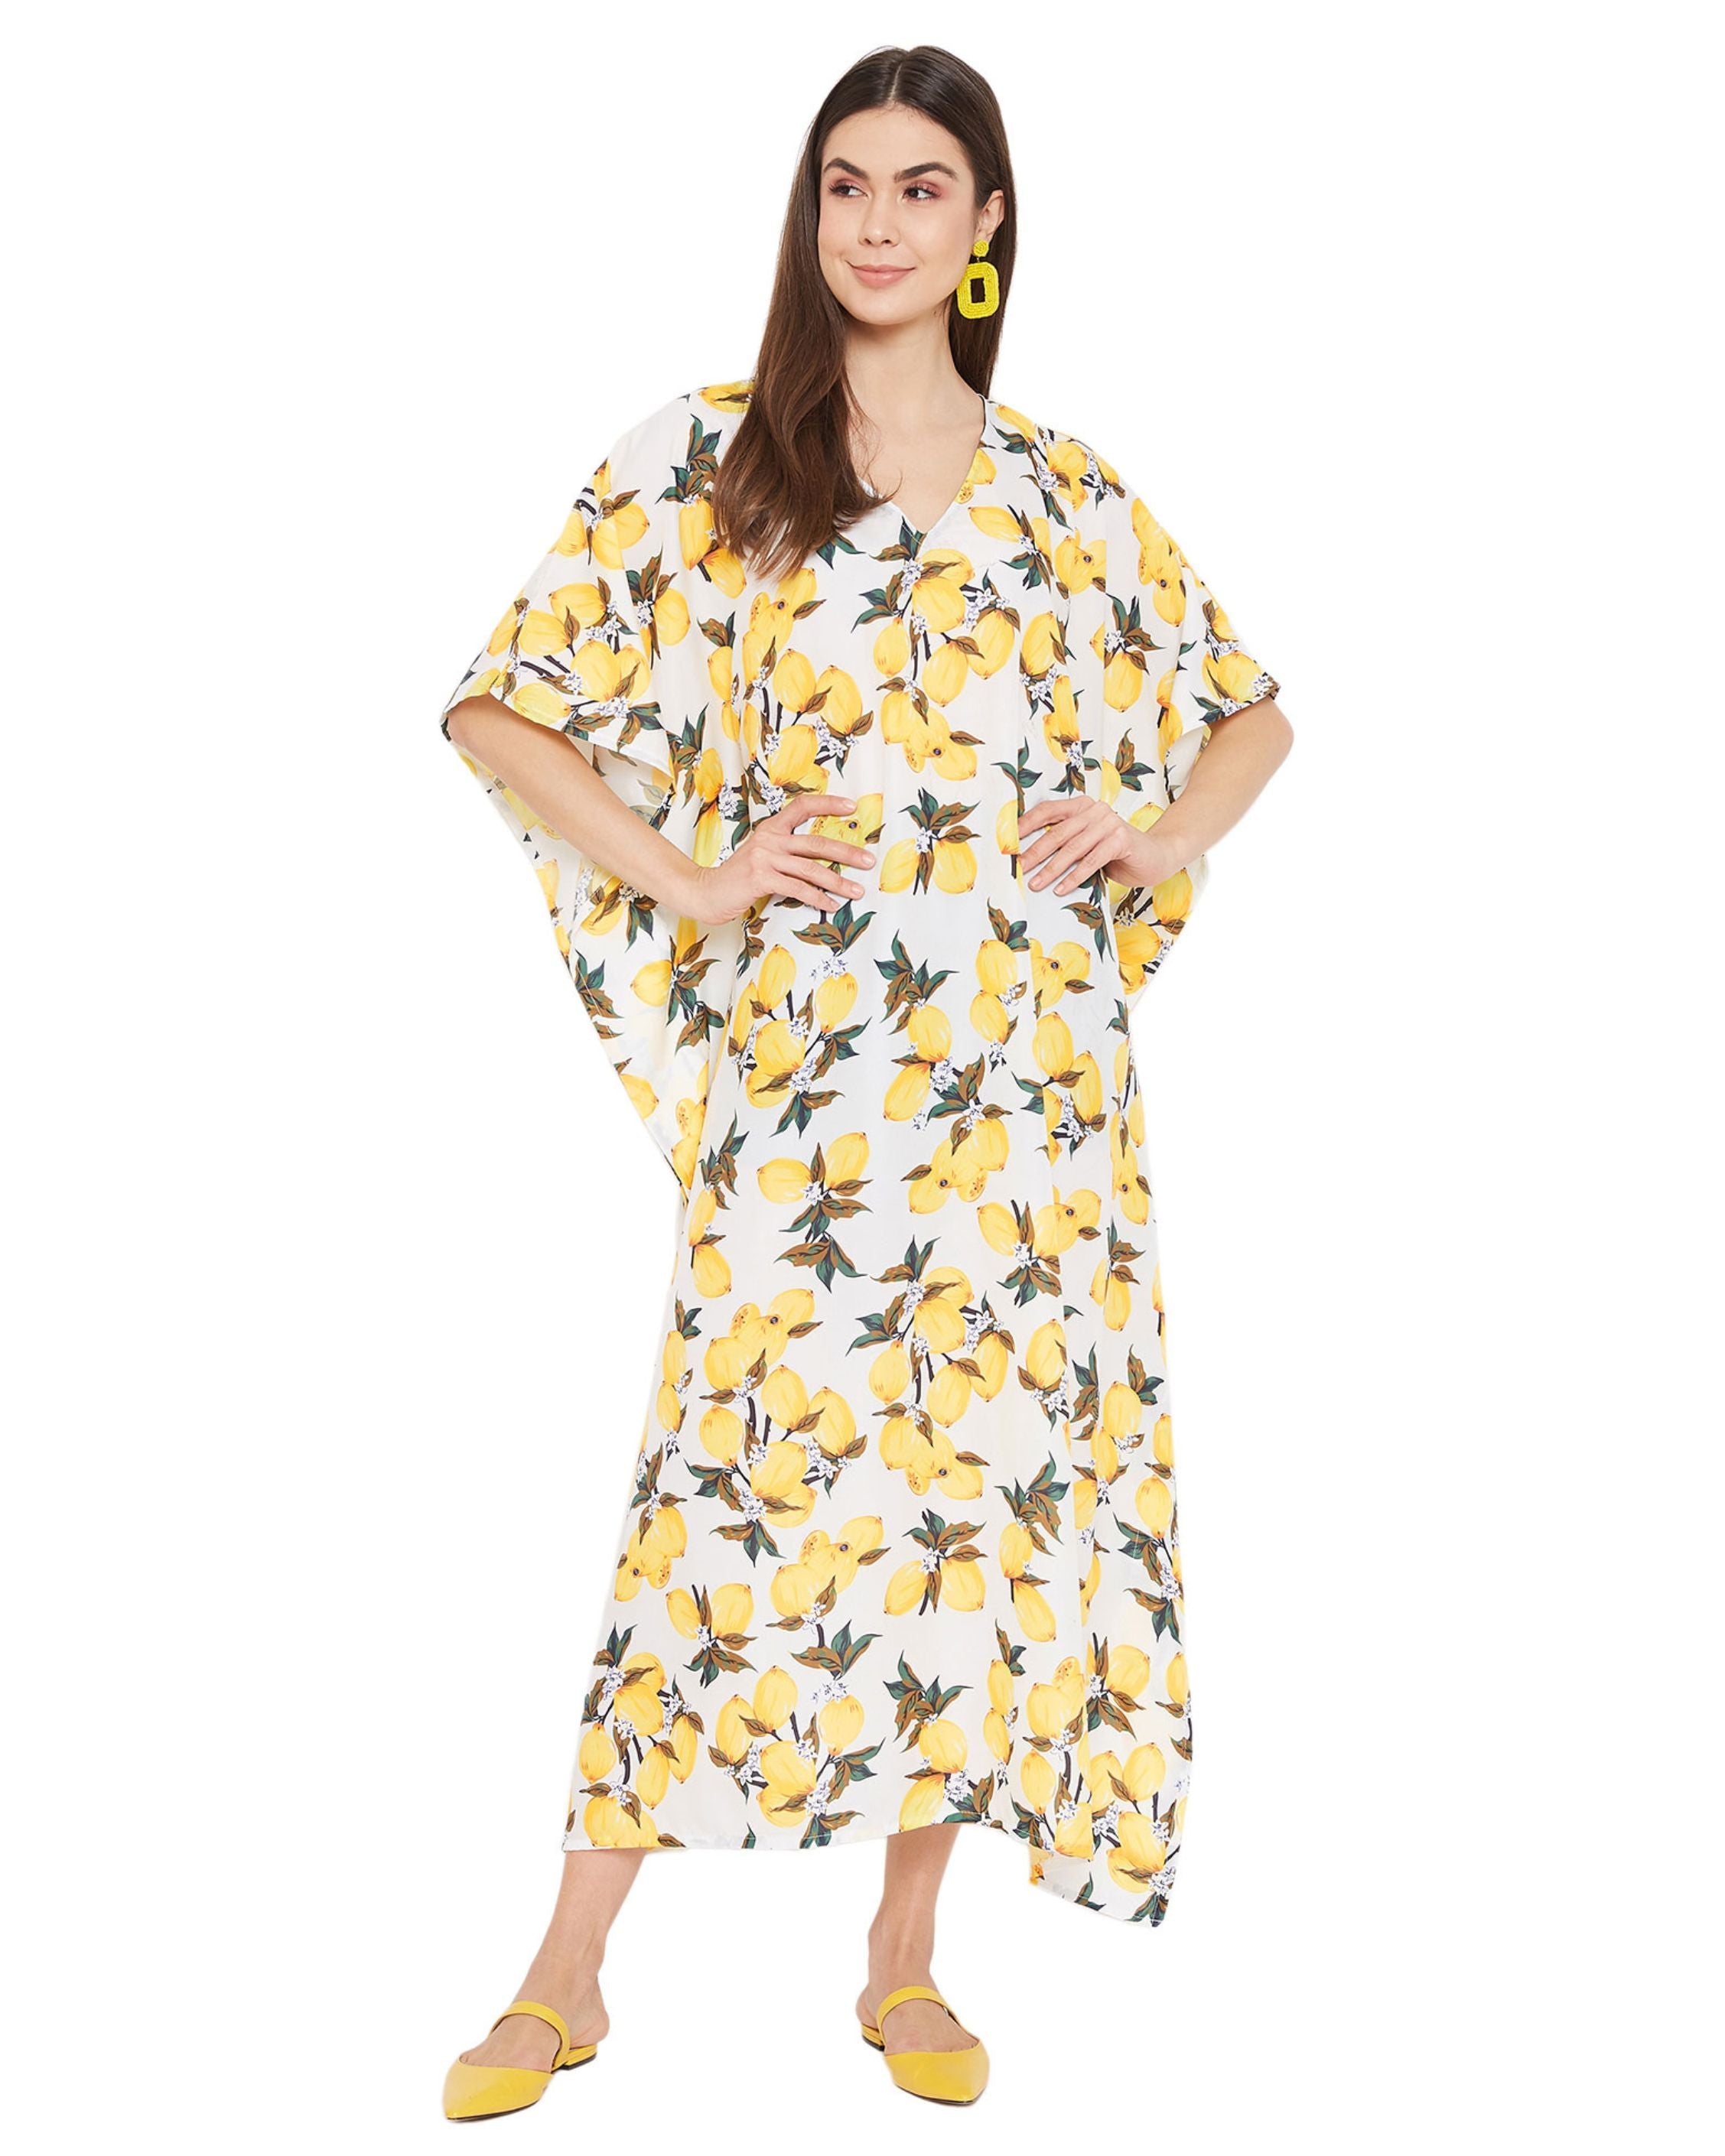 Floral Printed Yellow Polyester Kaftan Dress for Women